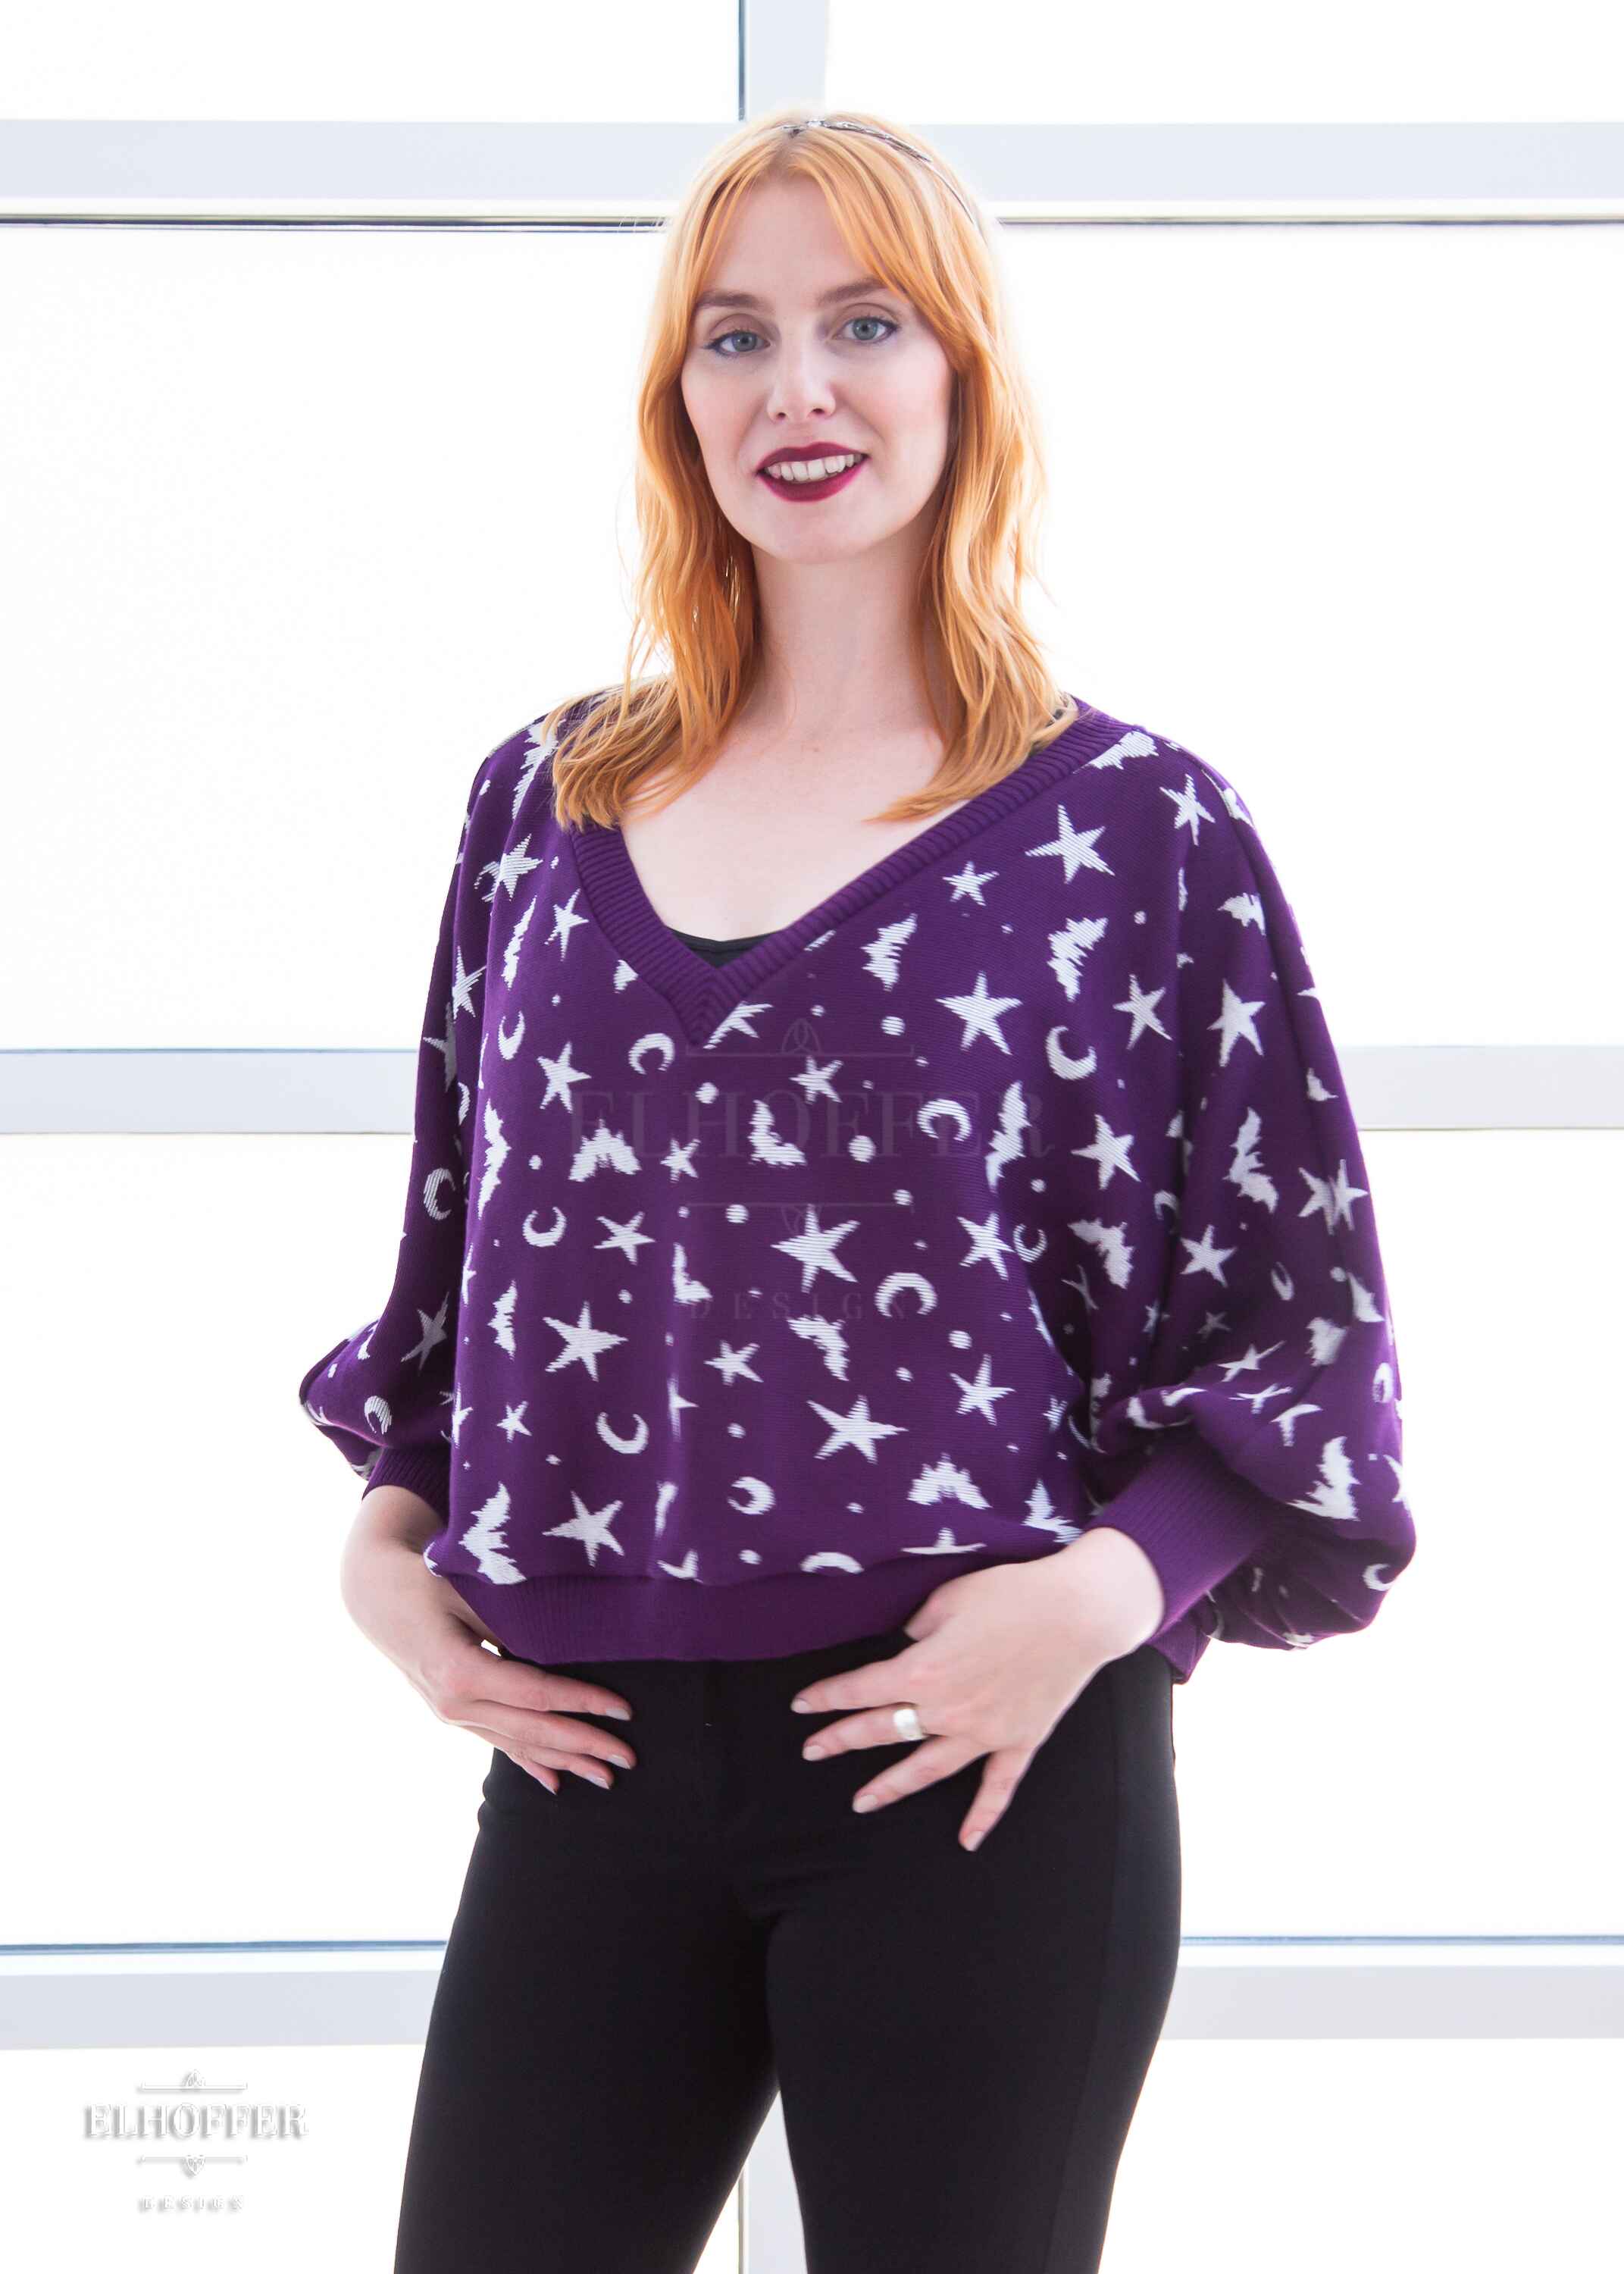 Harley, a fair skinned S model with shoulder length strawberry blonde hair, is smiling while wearing an oversized v neck cropped sweater with batwing sleeves that gather at the wrist. The main body of the sweater is purple with a white bat, star, moon, and dot pattern repeated throughout.